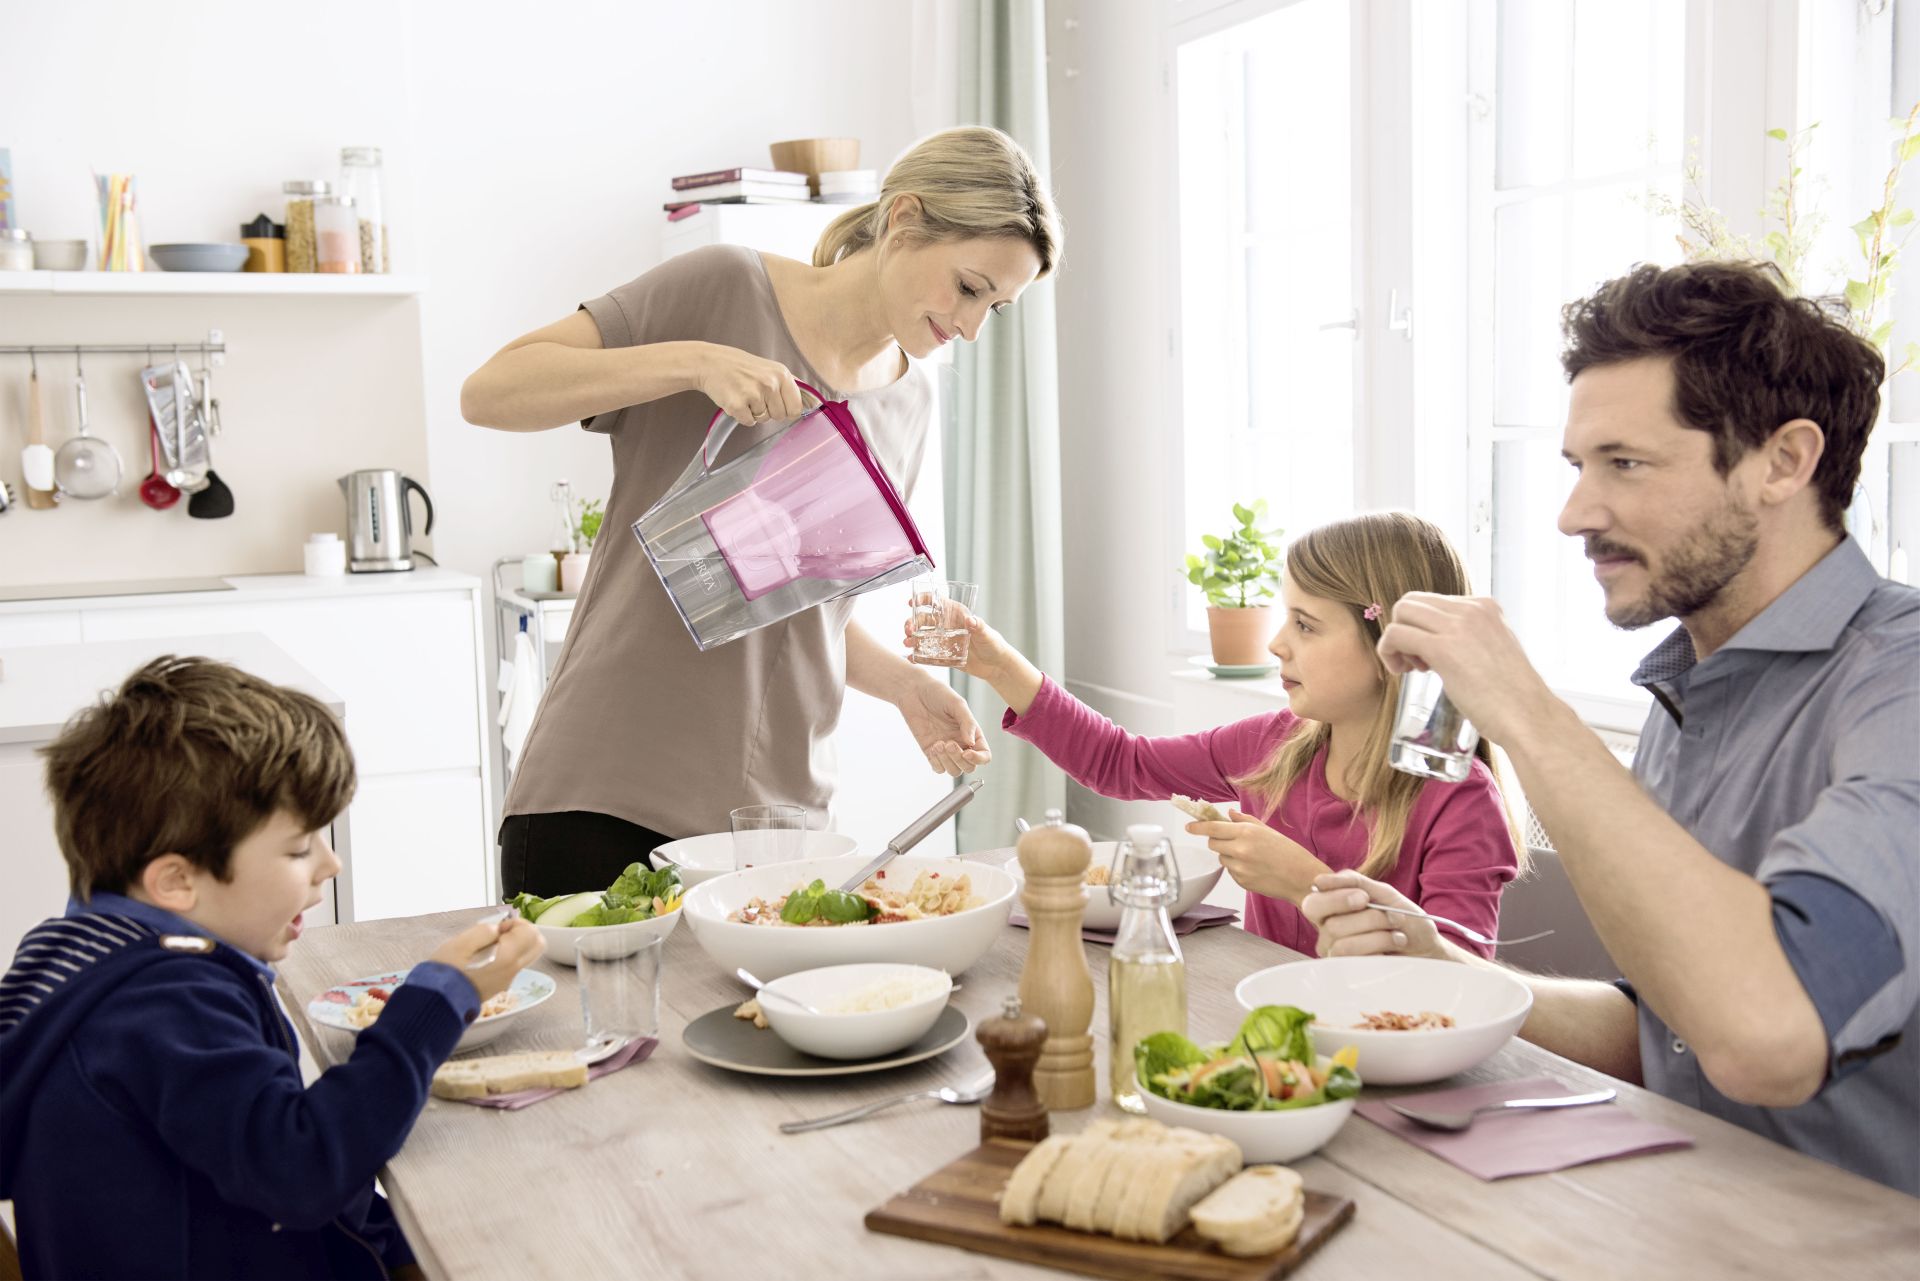 17_Marella_C_Basic_Berry_Family_Kitchen_Tabel_Food_Mother_Pouring_MXPlus_128023_0_158078_0